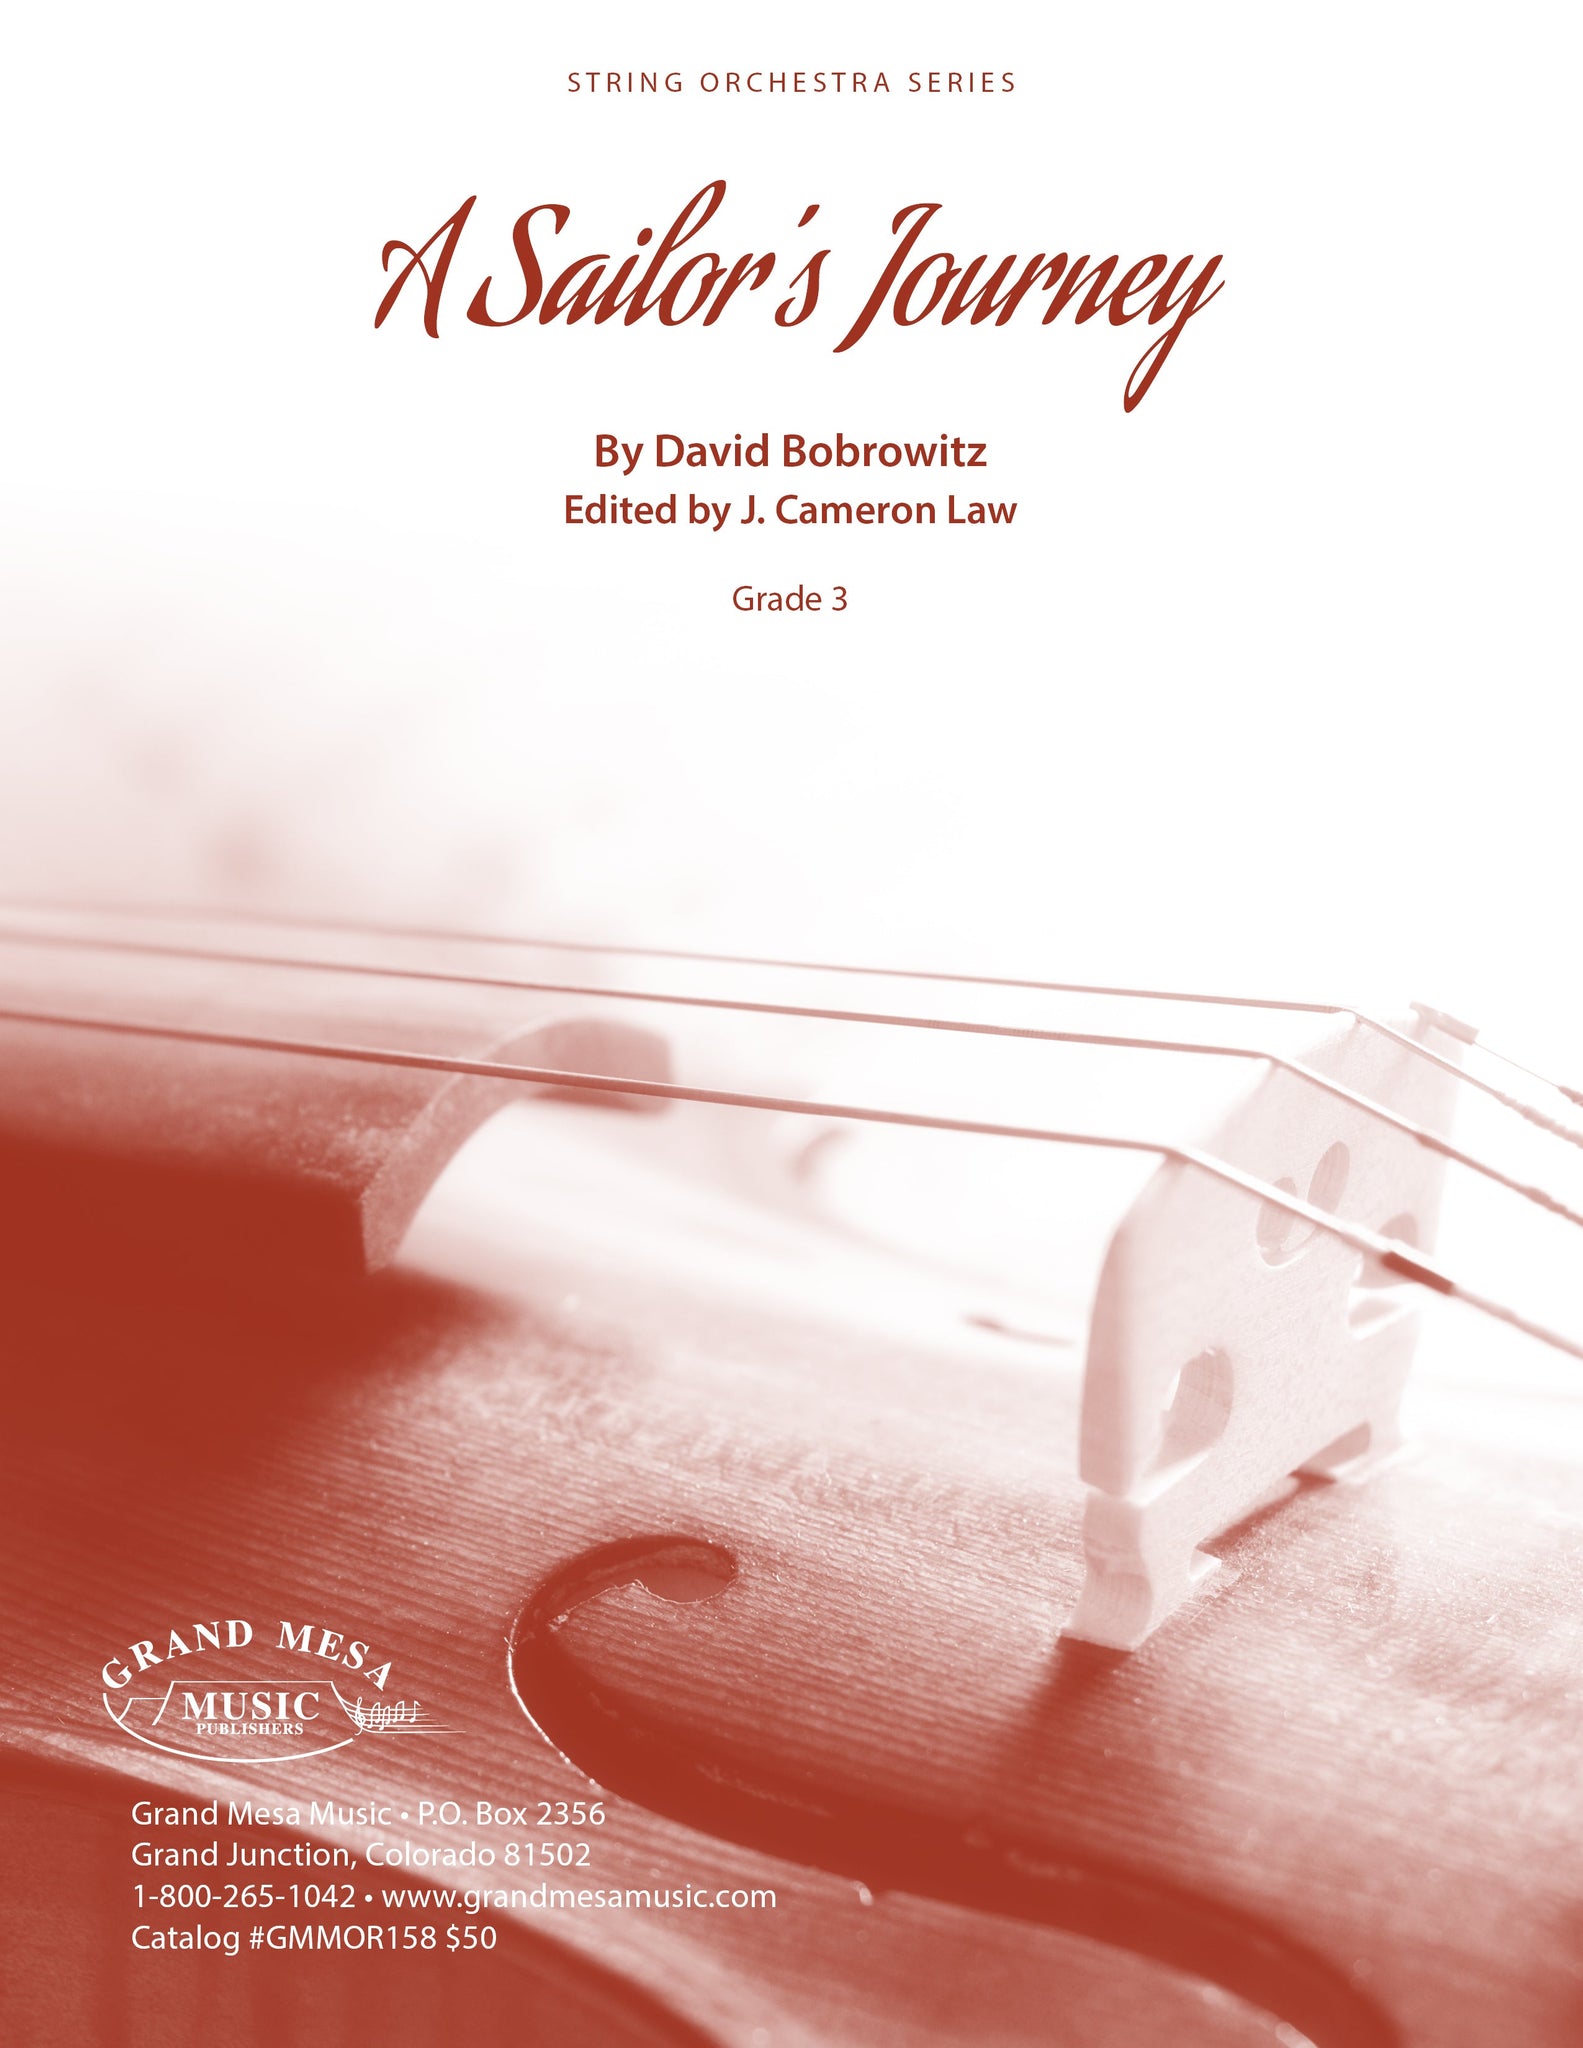 Strings sheet music cover of A Sailor's Journey, composed by David Bobrowitz.